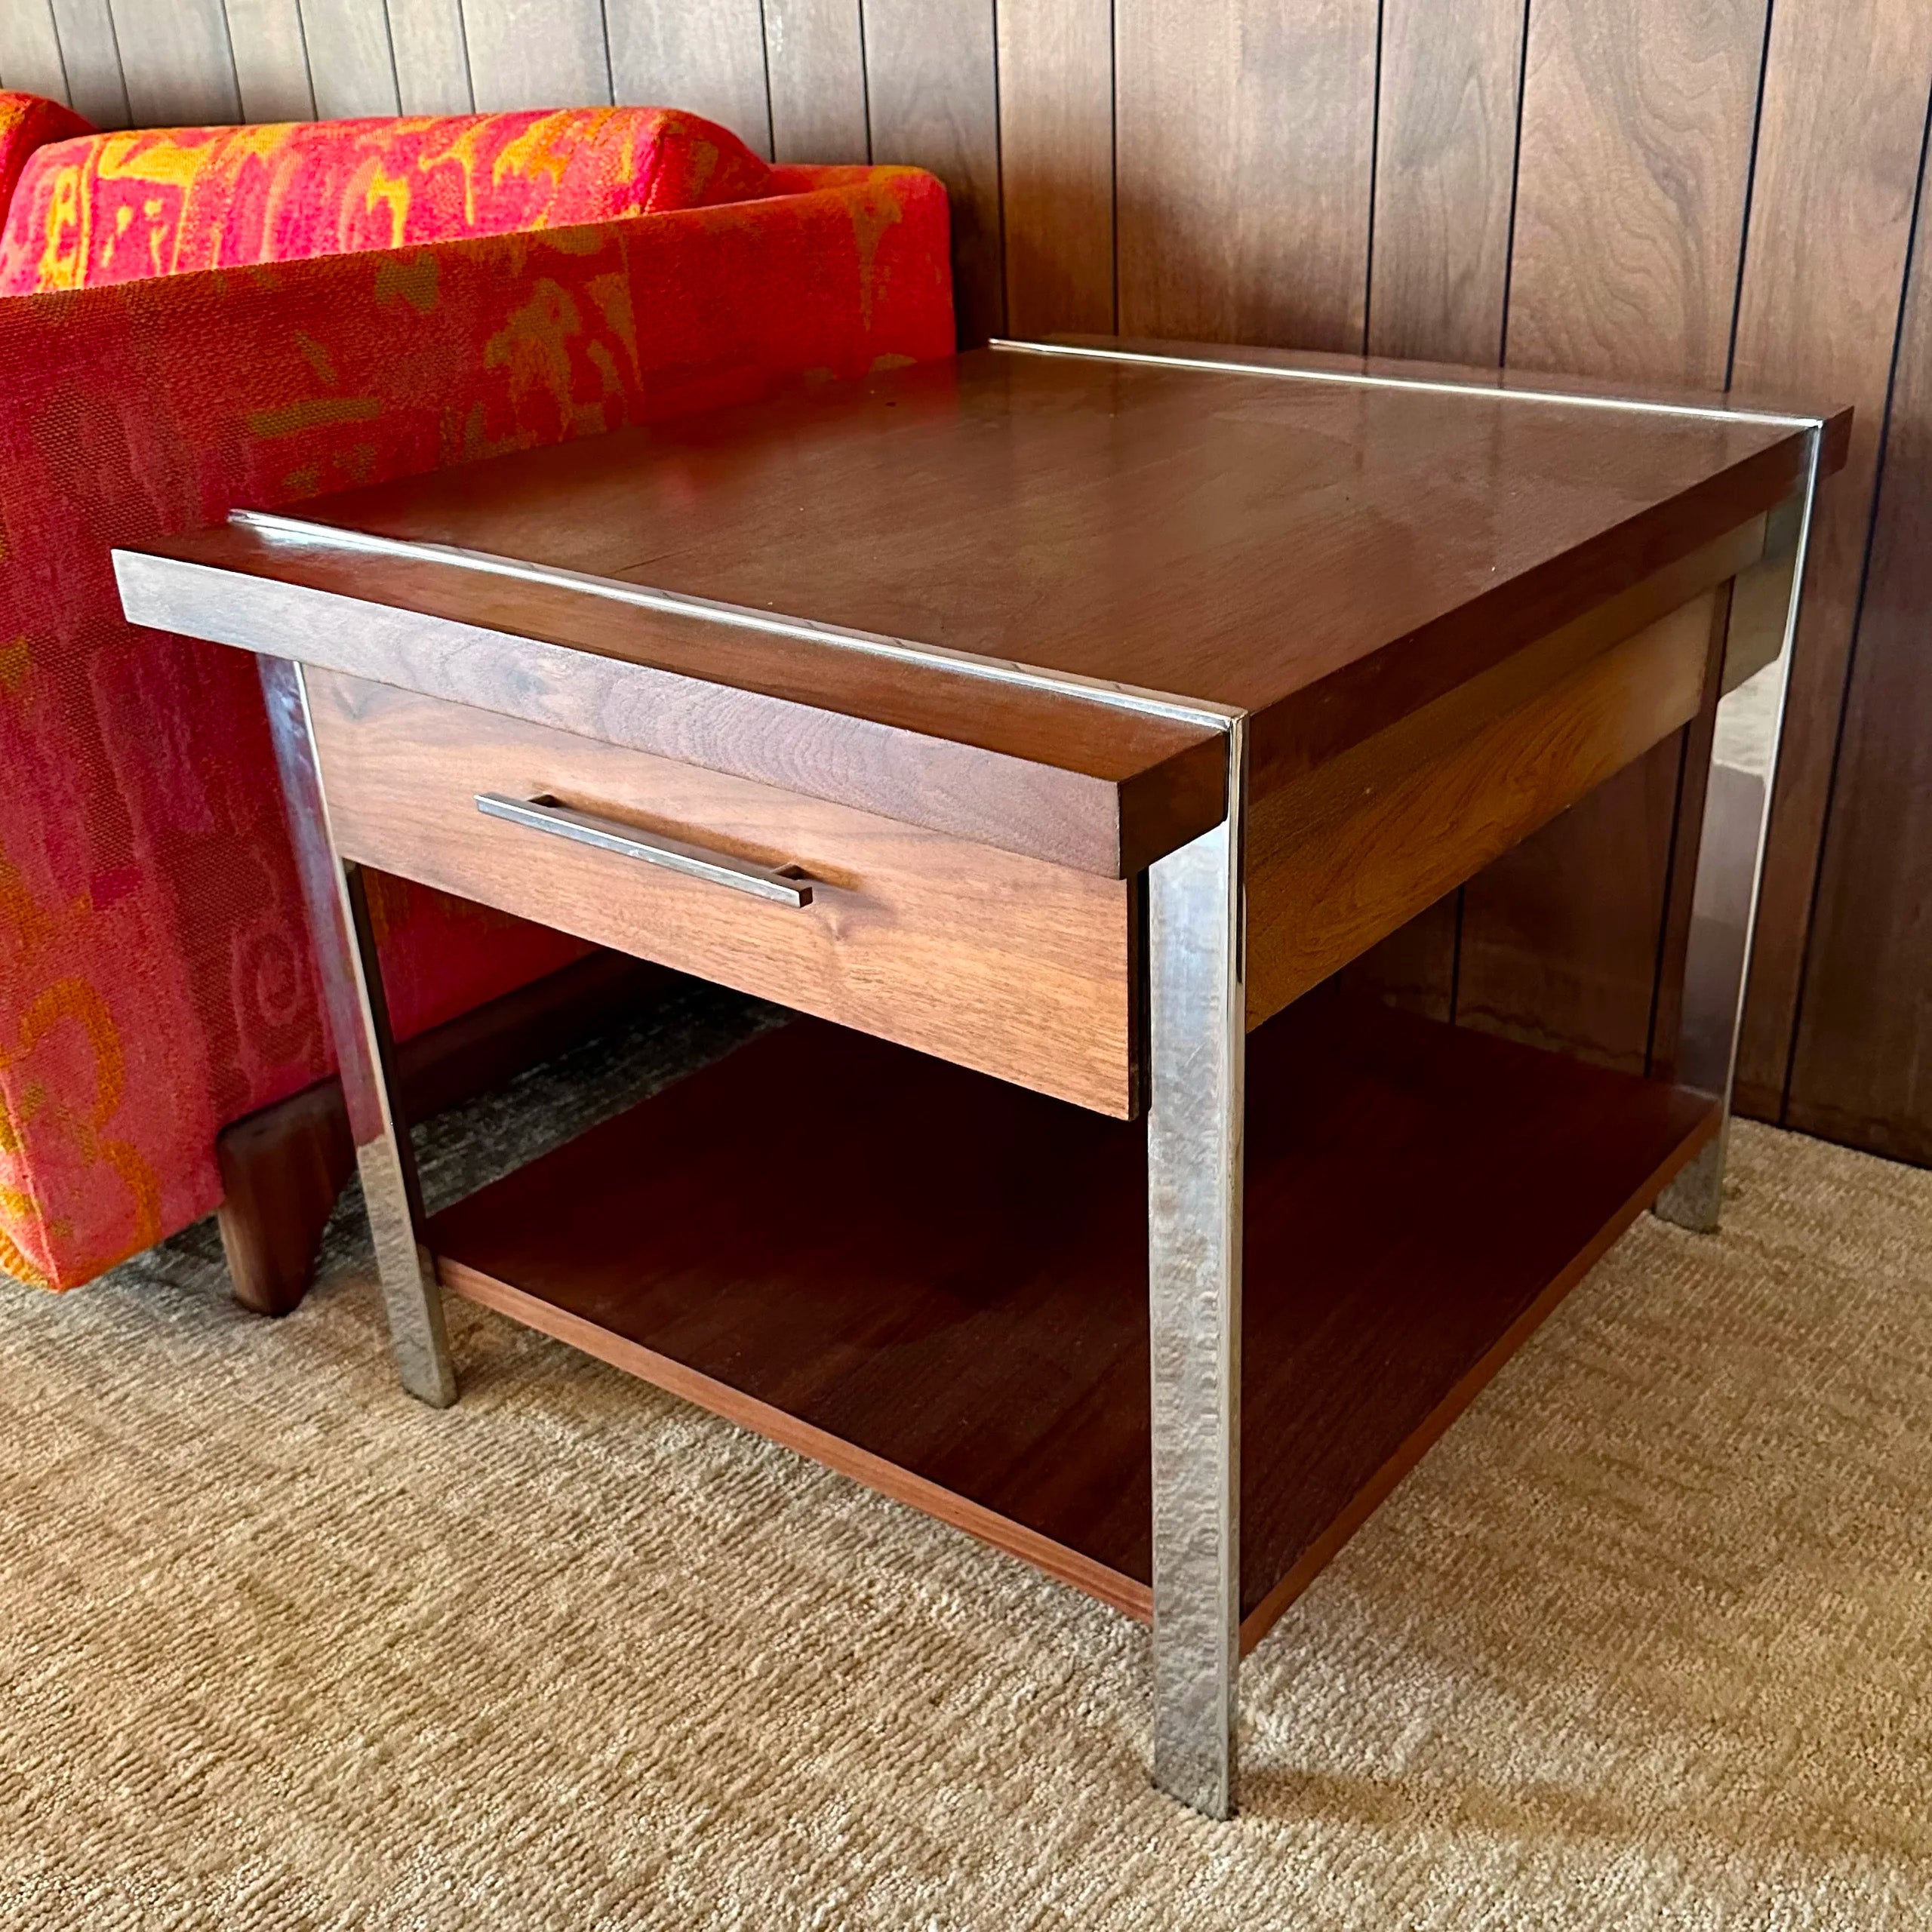 Lane Furniture Walnut, Rosewood, and Chrome End Table

This beautiful end table is one of the showcase pieces made by Lane Furniture. This piece is beautifully crafted, rare, and sought after. The table is constructed of walnut and rosewood, with